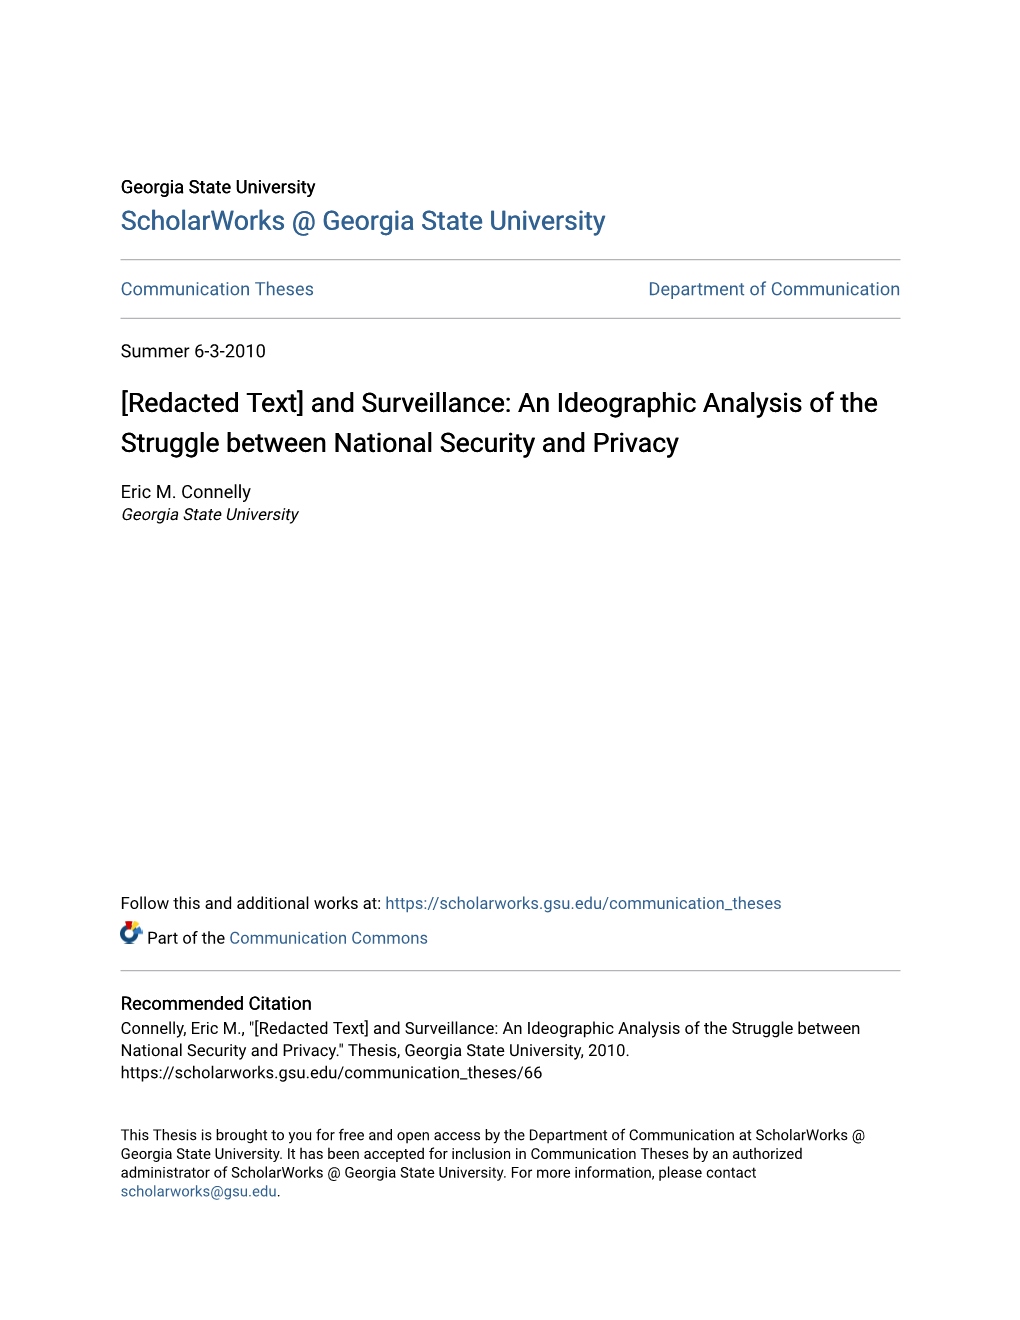 An Ideographic Analysis of the Struggle Between National Security and Privacy